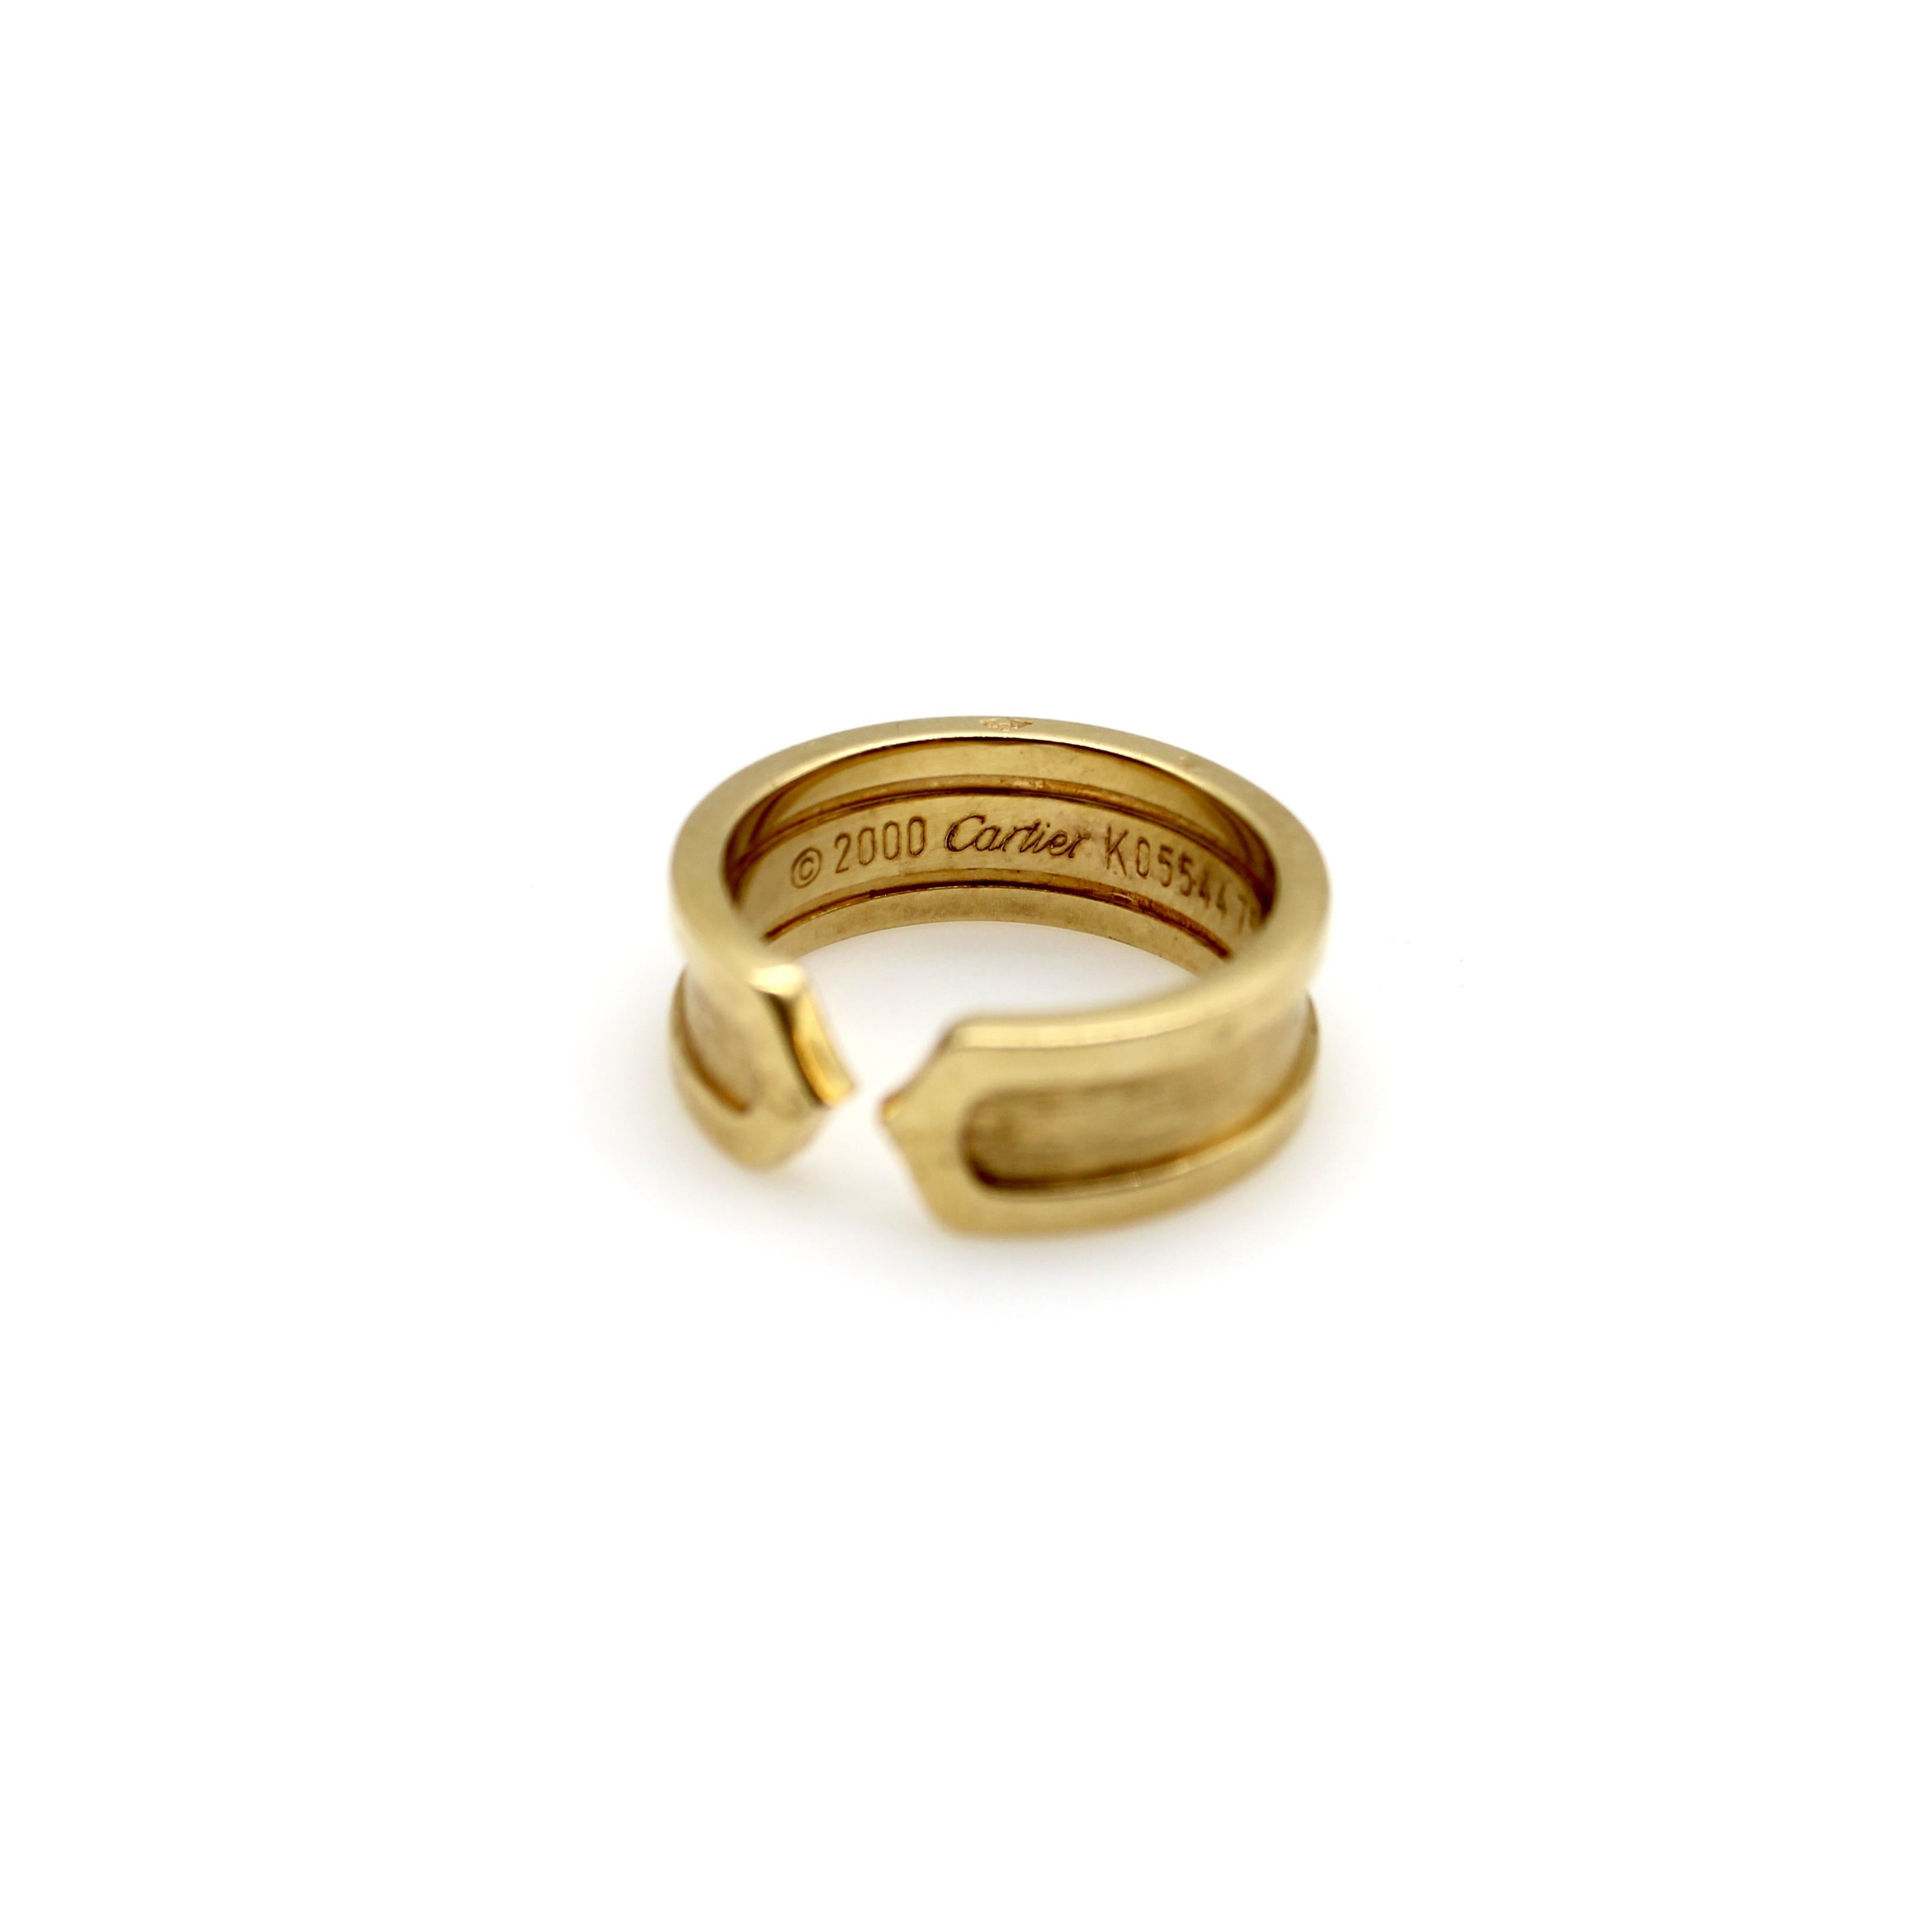 Contemporary Vintage Cartier 18K Gold Double C Ring circa 2000 For Sale